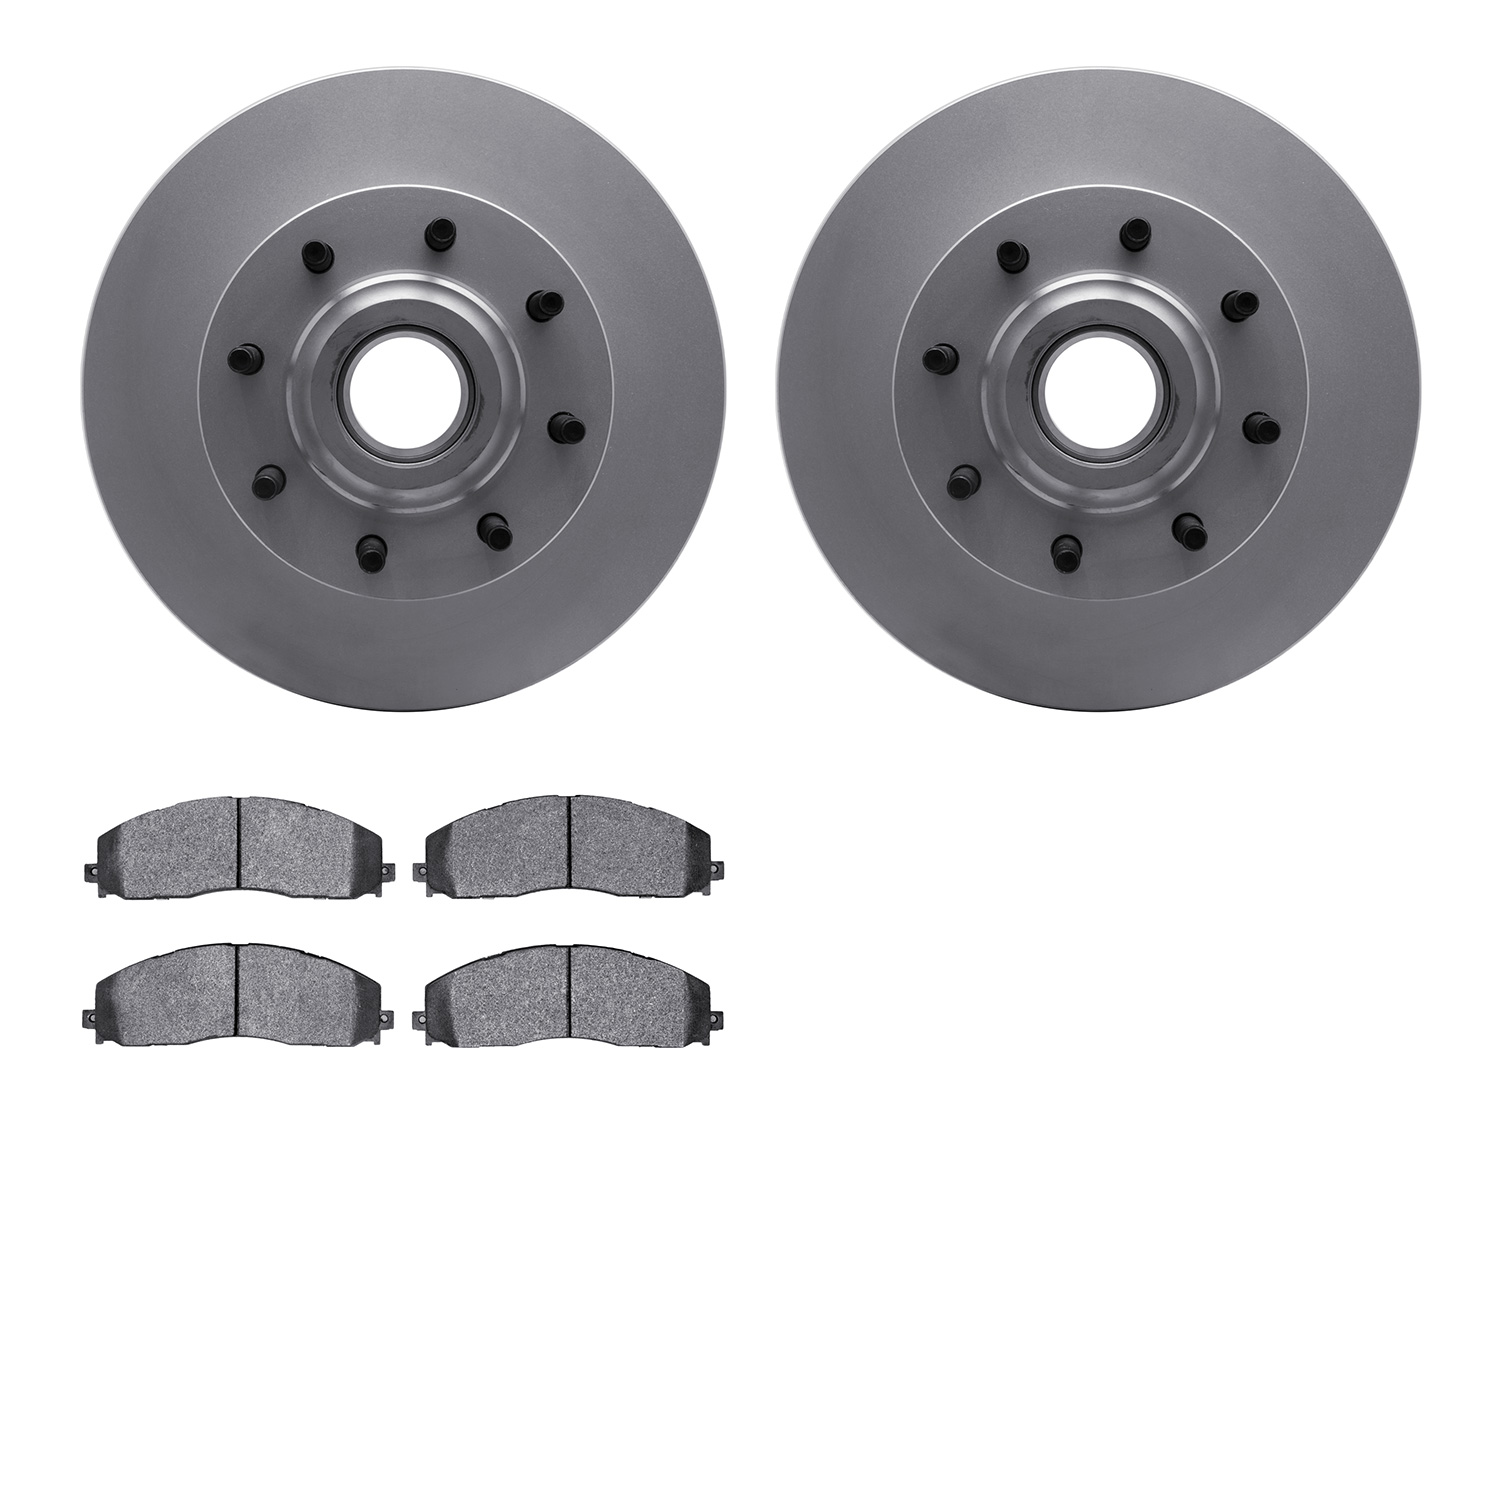 4402-54071 Geospec Brake Rotors with Ultimate-Duty Brake Pads Kit, Fits Select Ford/Lincoln/Mercury/Mazda, Position: Front